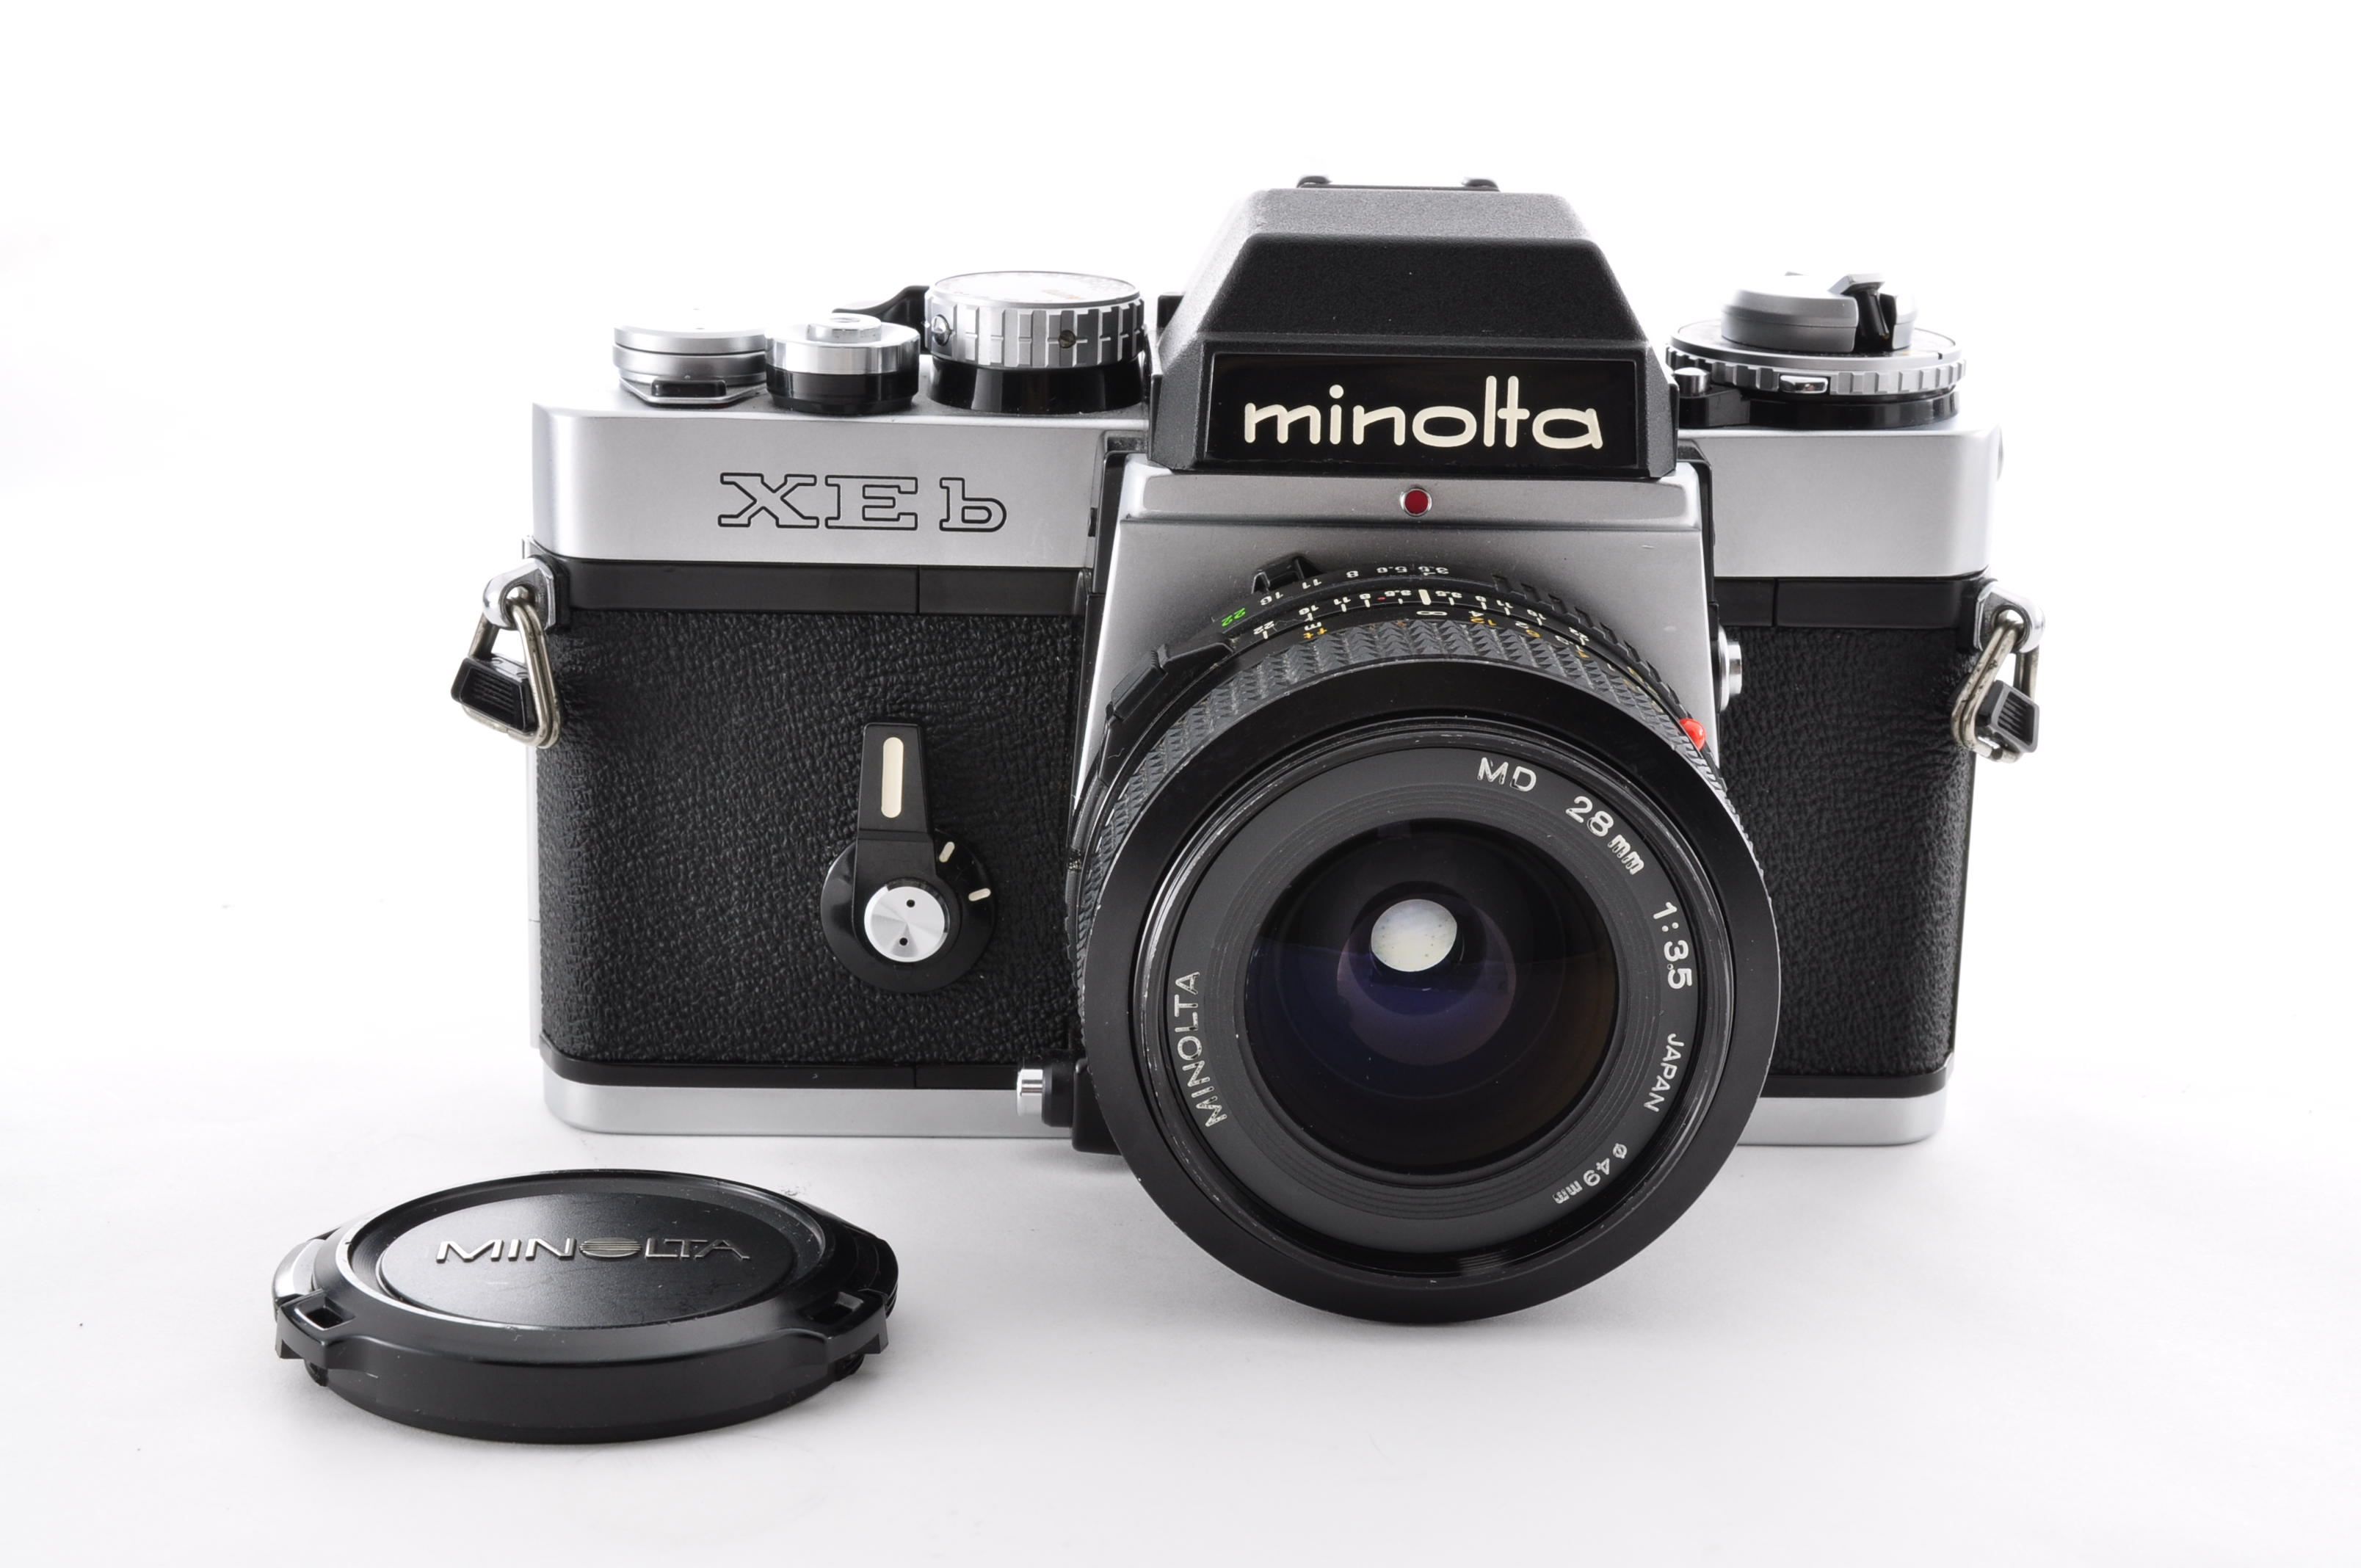 Minolta XEb (XE-5) 35mm SLR Film Camera + New MD 28mm F3.5 [Exc+5] From Japan img23